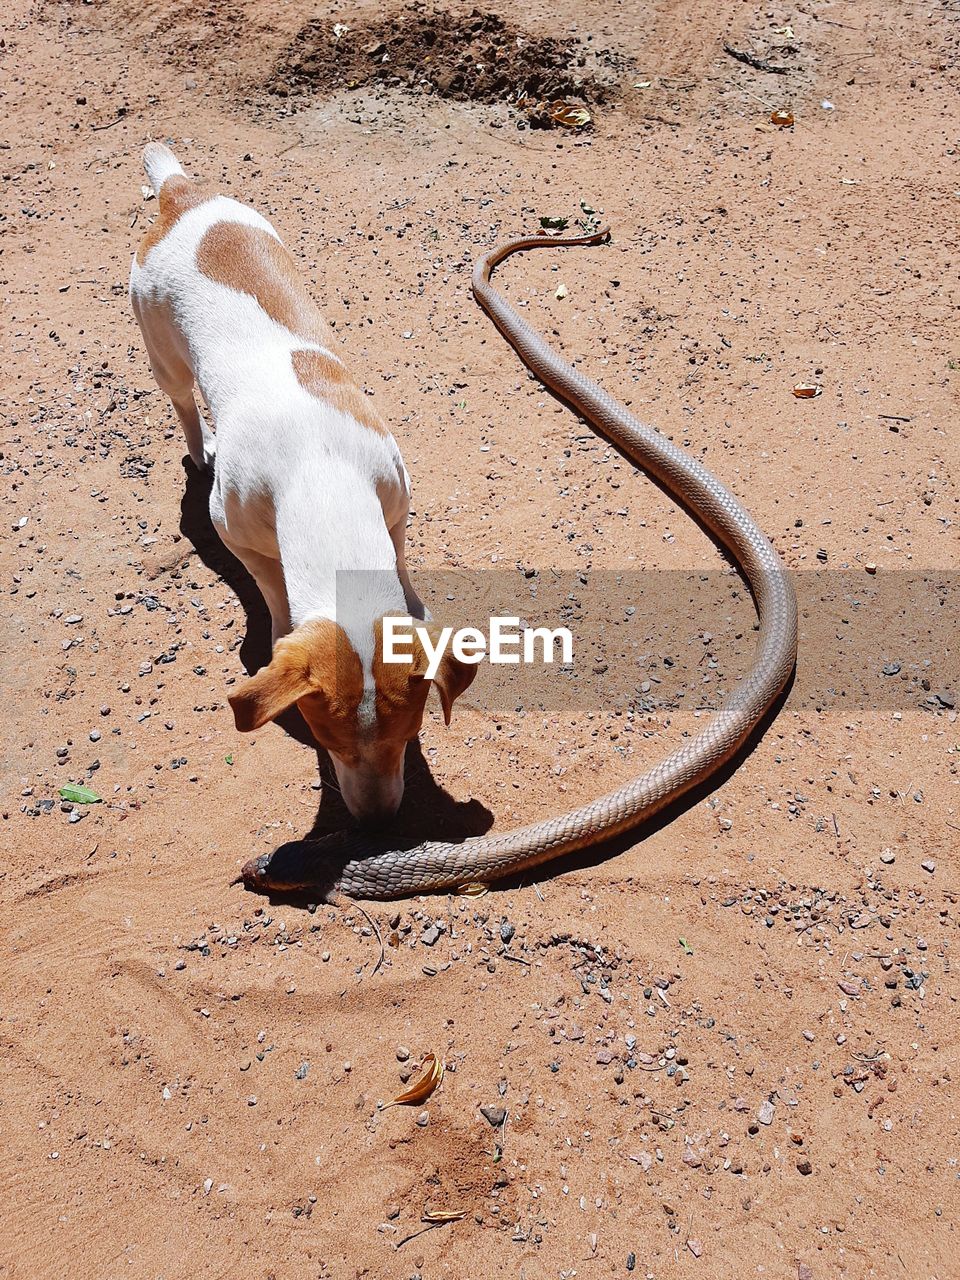 High angle view of jack russel dog catching snake on sand